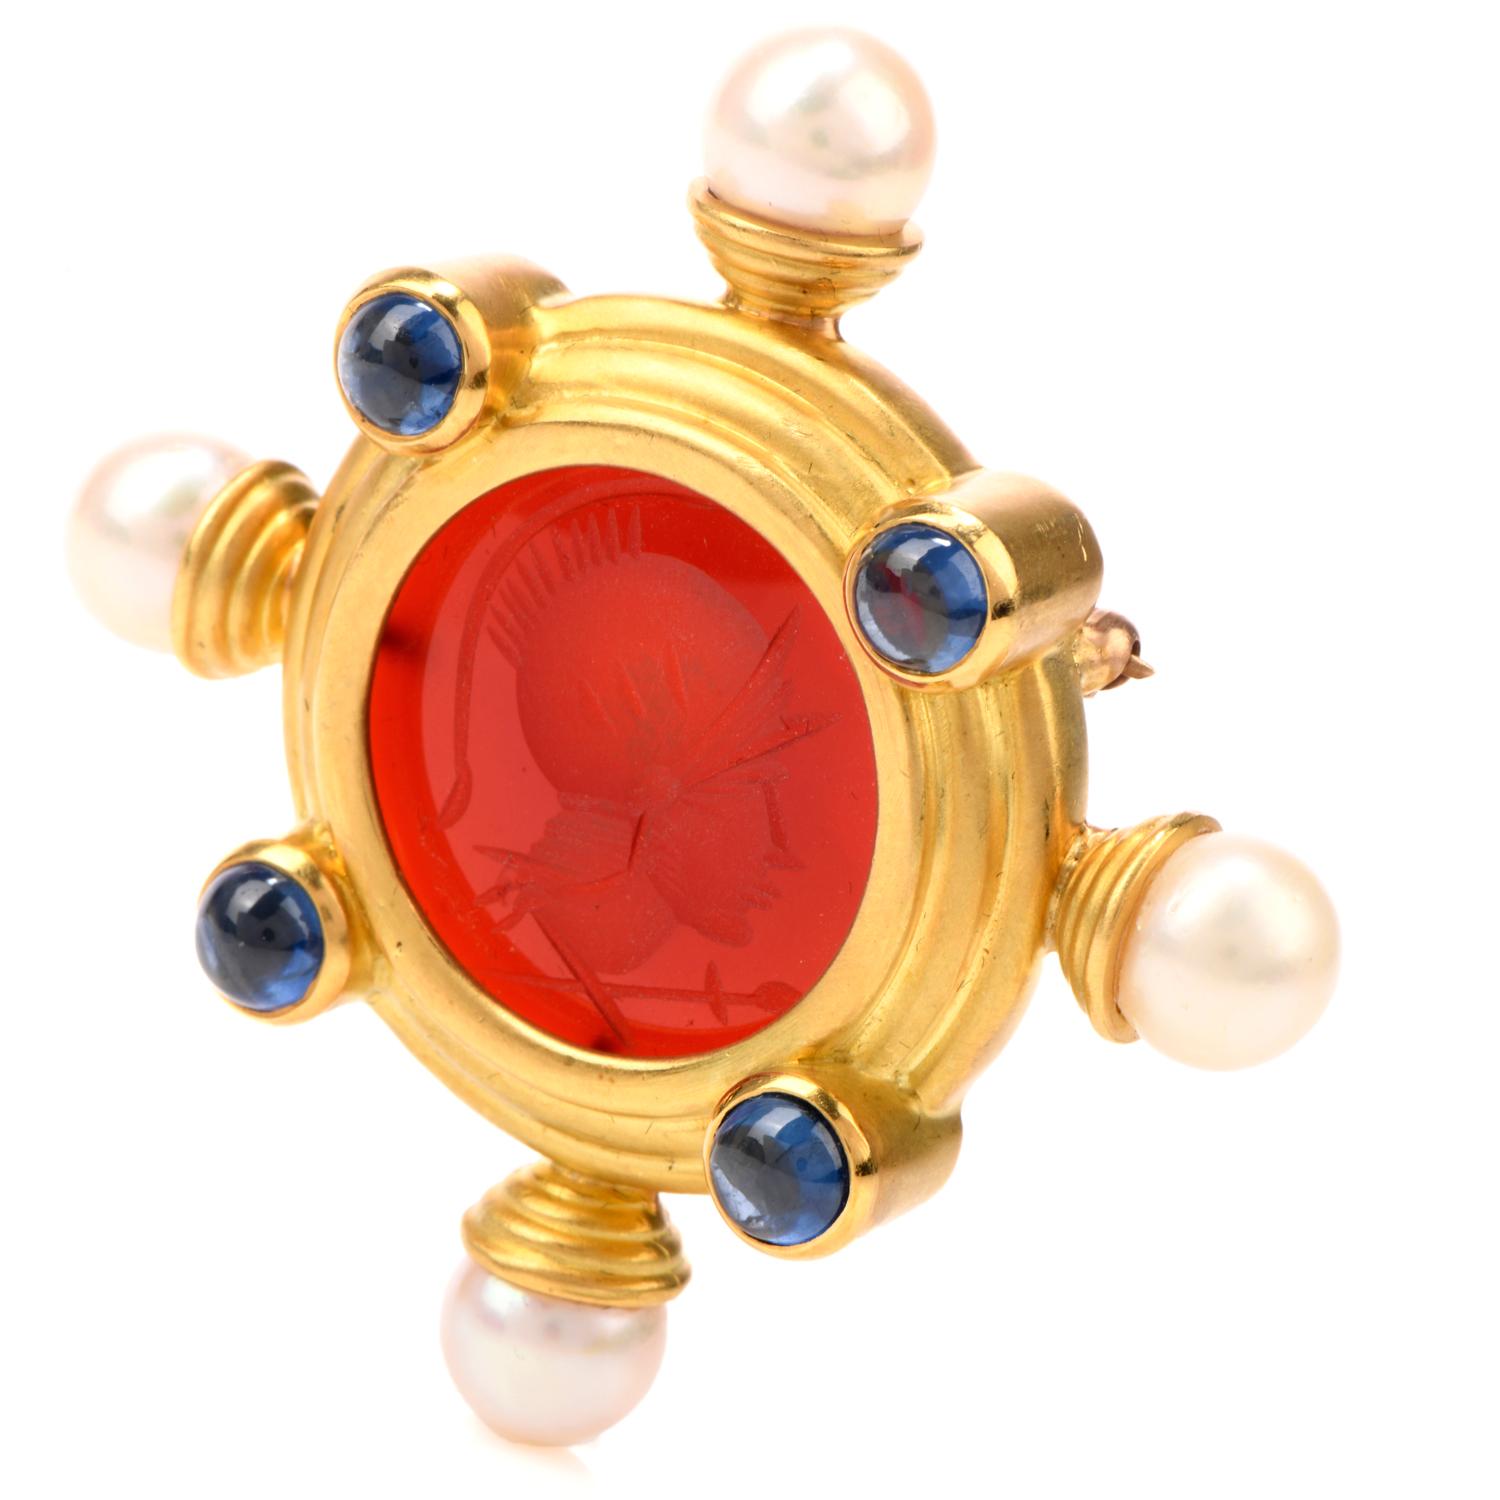 A beautifully carved Intaglio of Venetian glass in 18k satin finish yellow gold with four 8mm saltwater Akoya pearl and four cabochon genuine sapphire weighing approx. 2.00 carats total. The 18 karat brooch measures 2 inches  by 2 inches . This